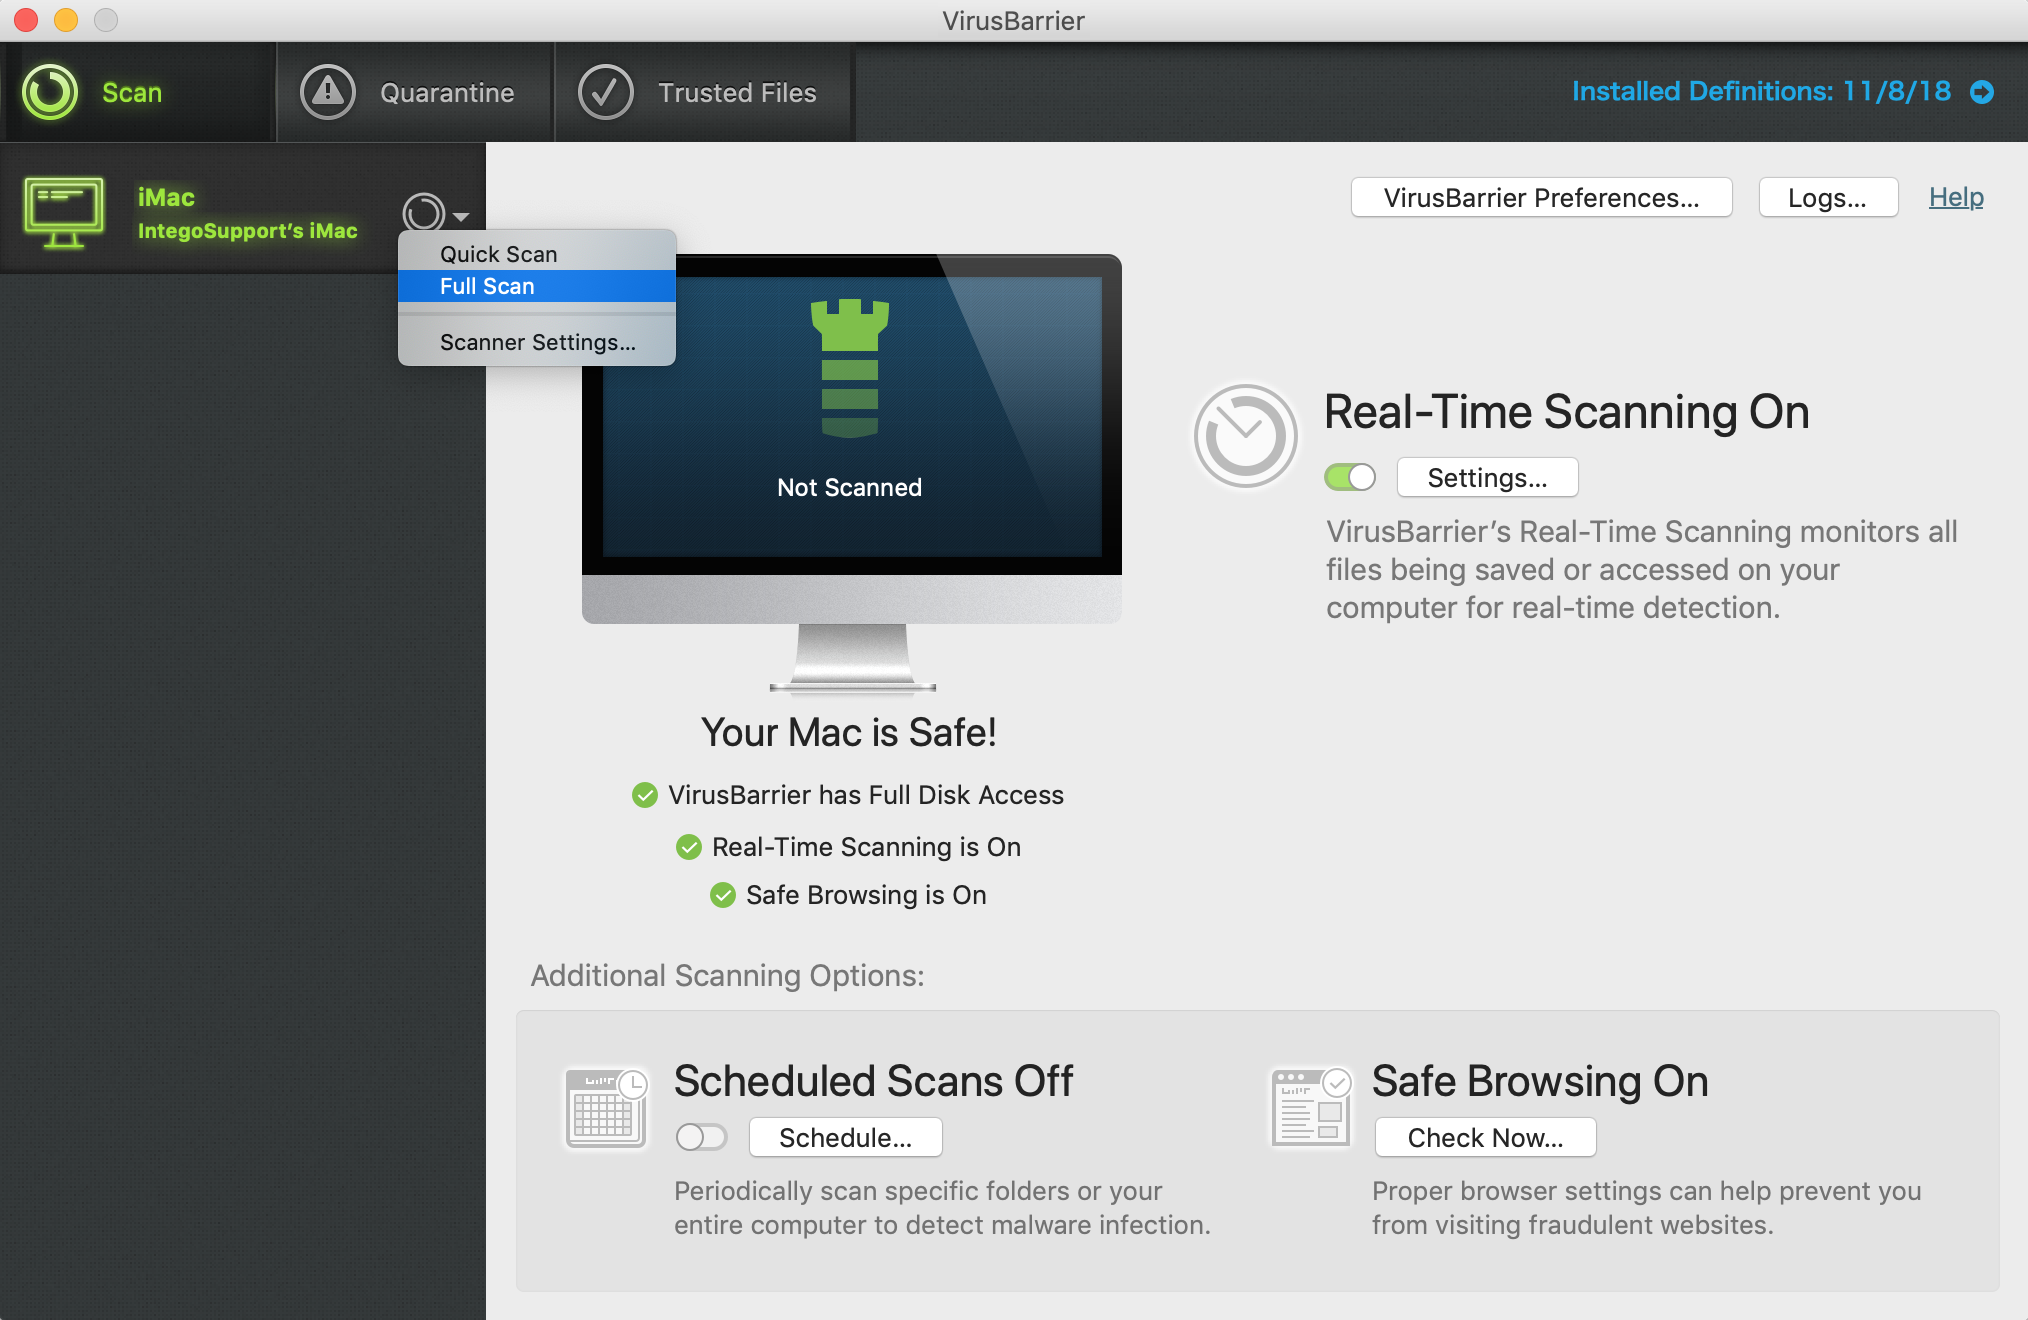 adware removal for mac free